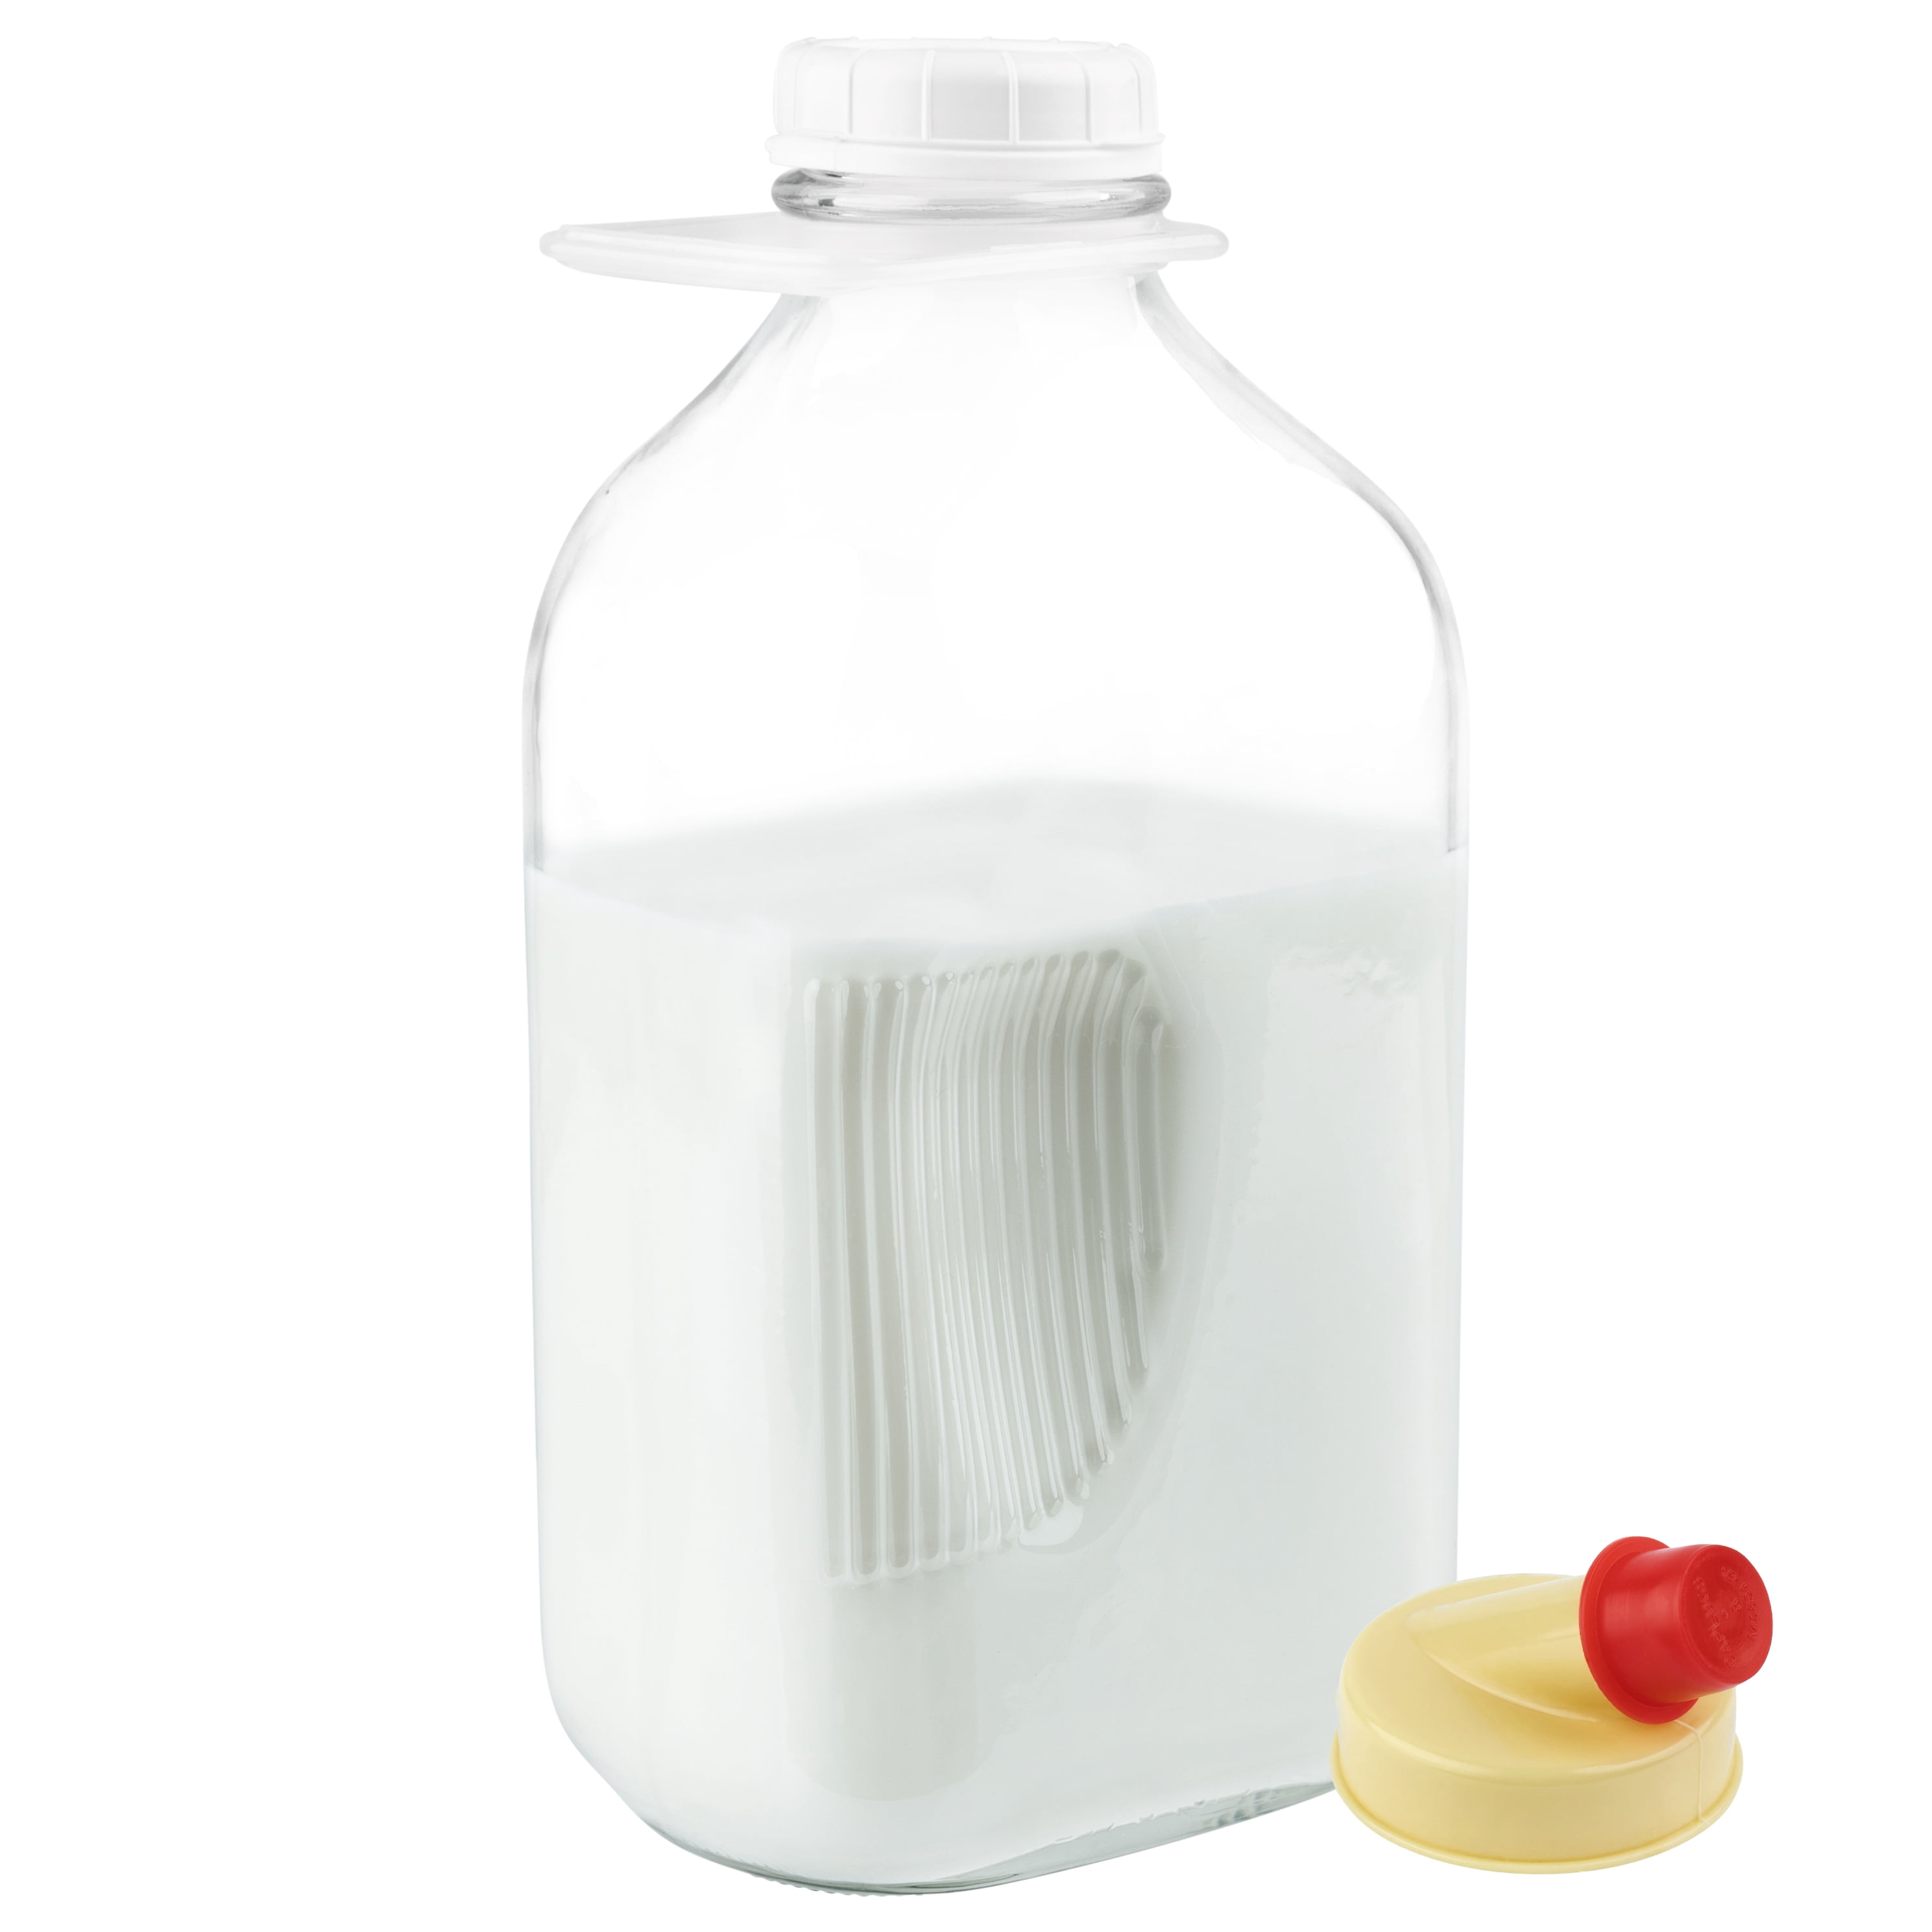  kitchentoolz 32oz Square Glass Milk Bottle with Plastic  Airtight Lids Vintage Reusable Quart Sized Dairy Drinking Containers for  Milk, Yogurt, Smoothies, Kefir, Kombucha, and Water- Pack of 2: Home &  Kitchen